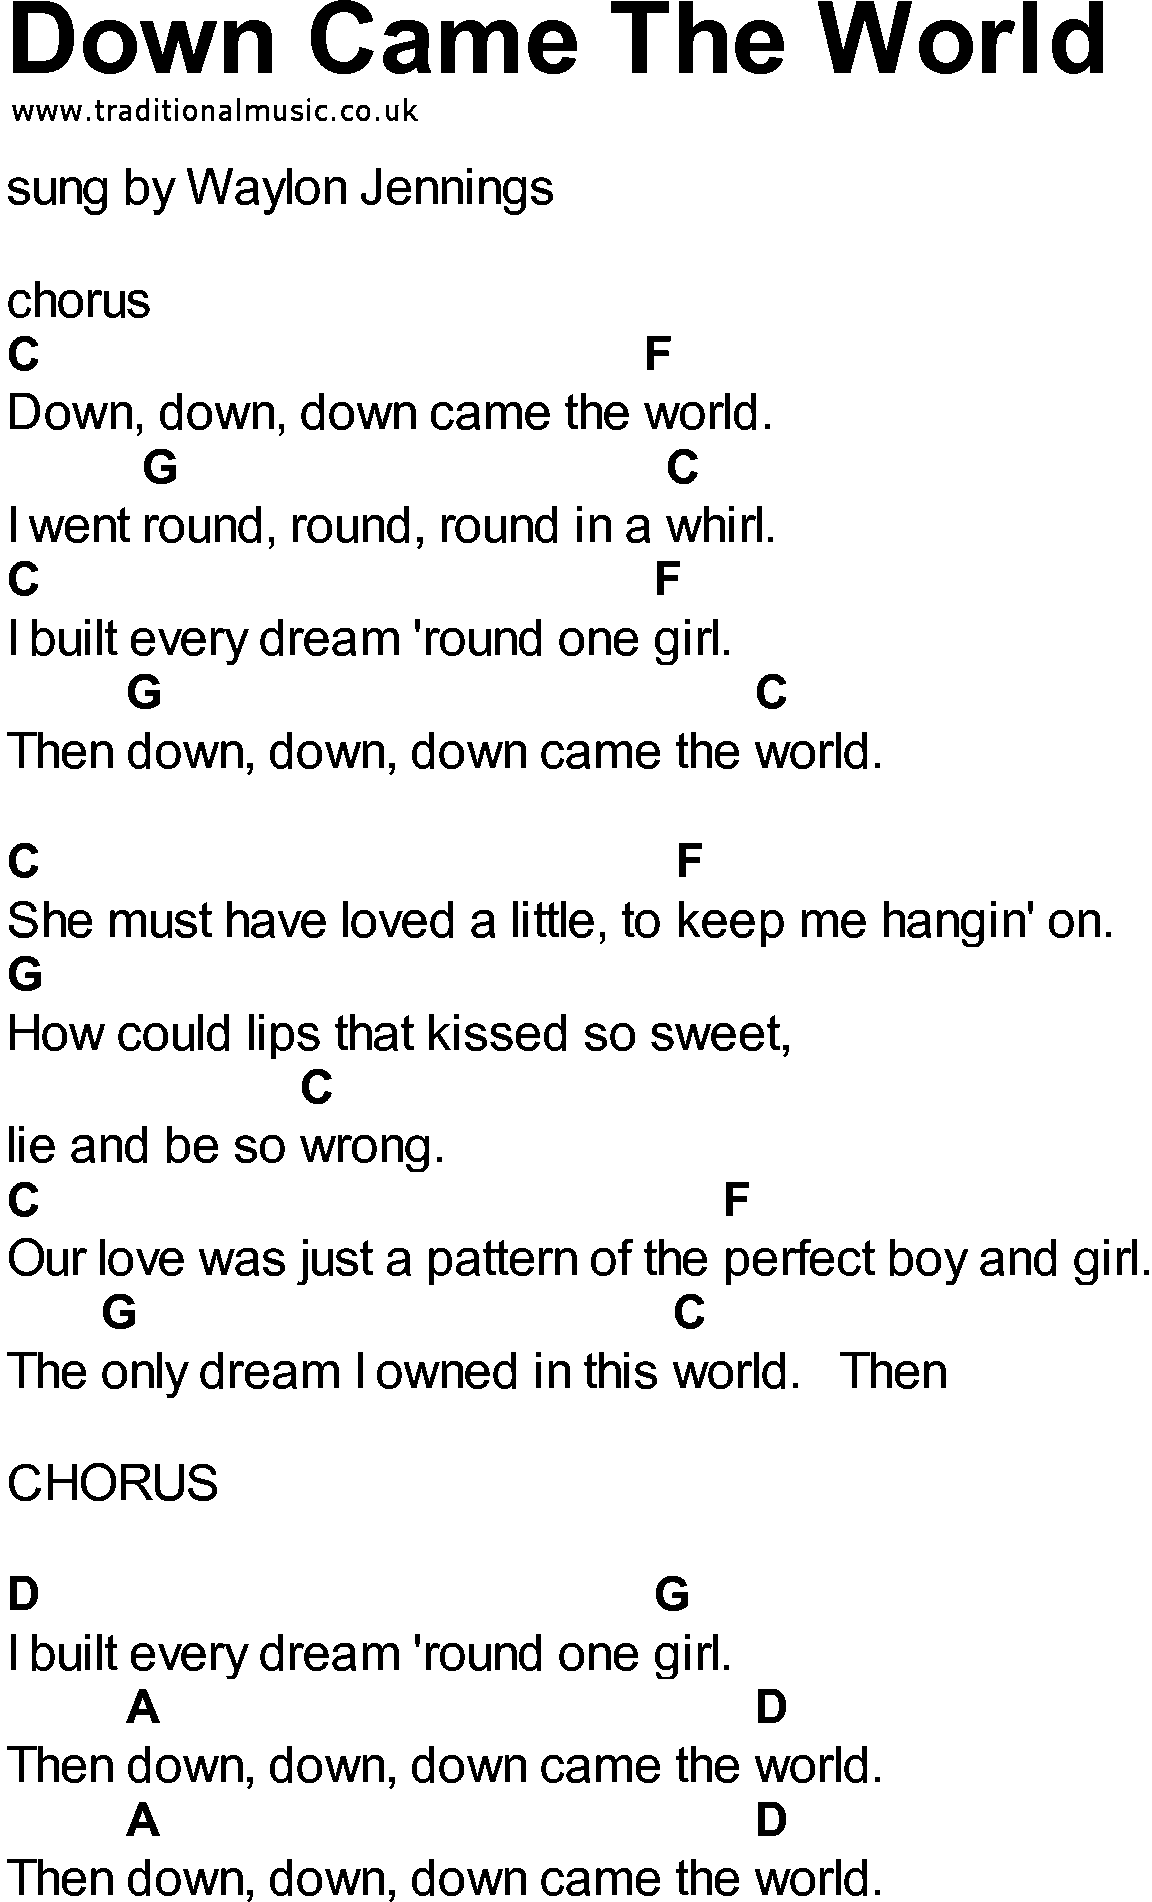 Bluegrass songs with chords - Down Came The World